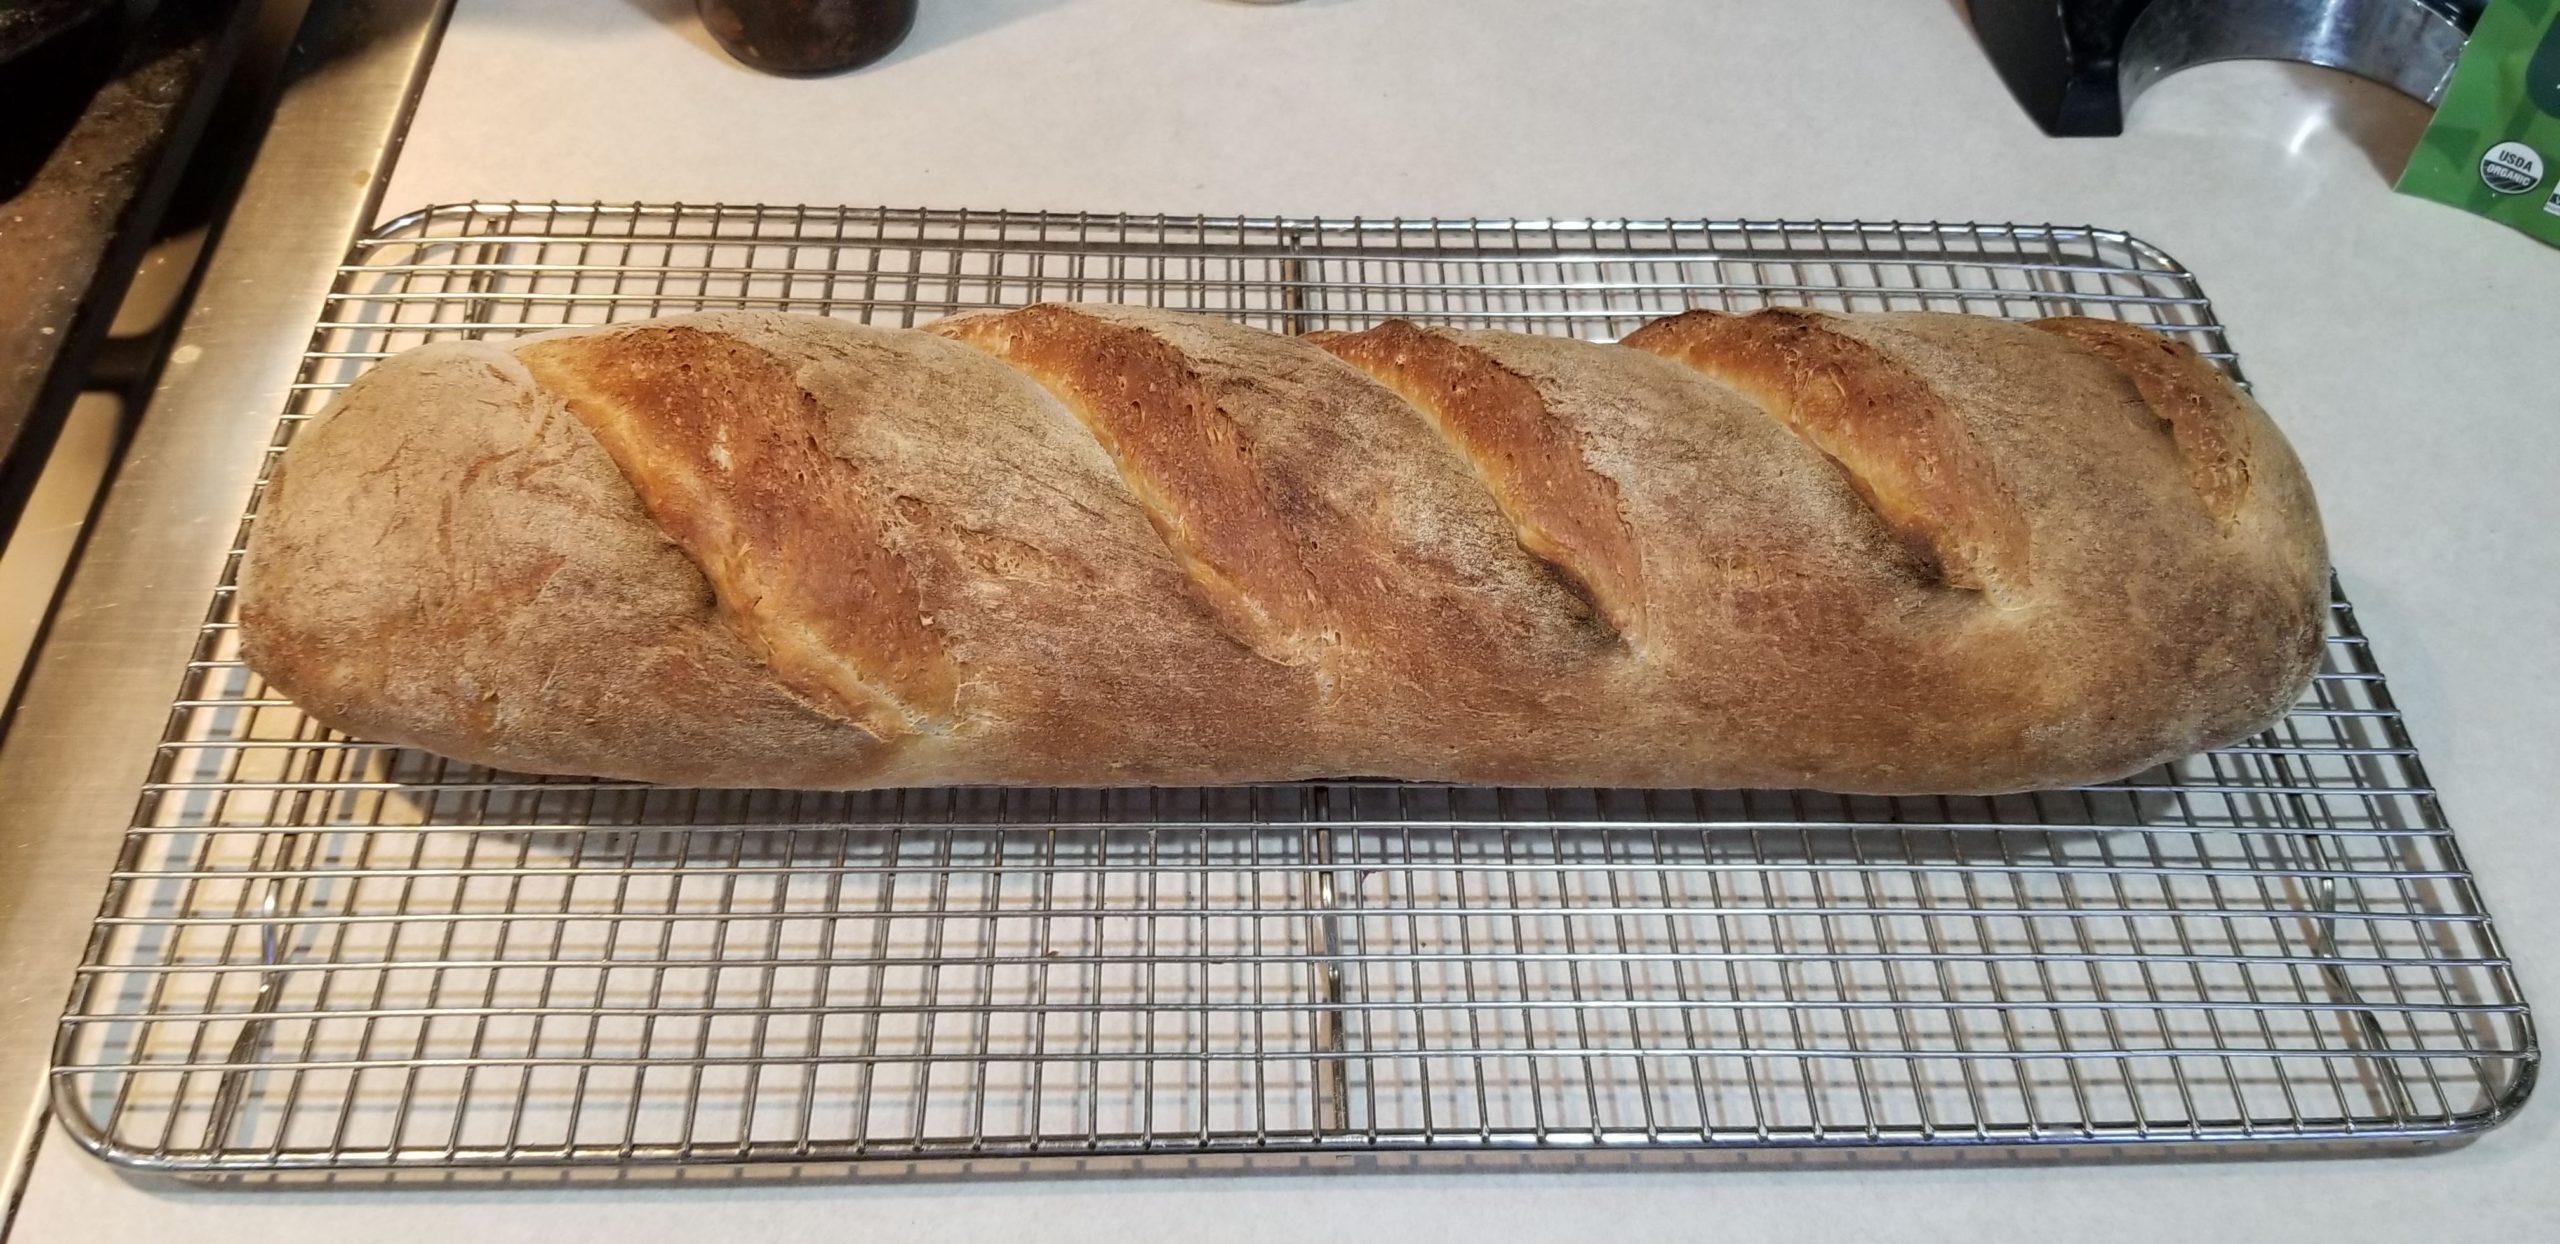 The House Bread - Finished Loaf